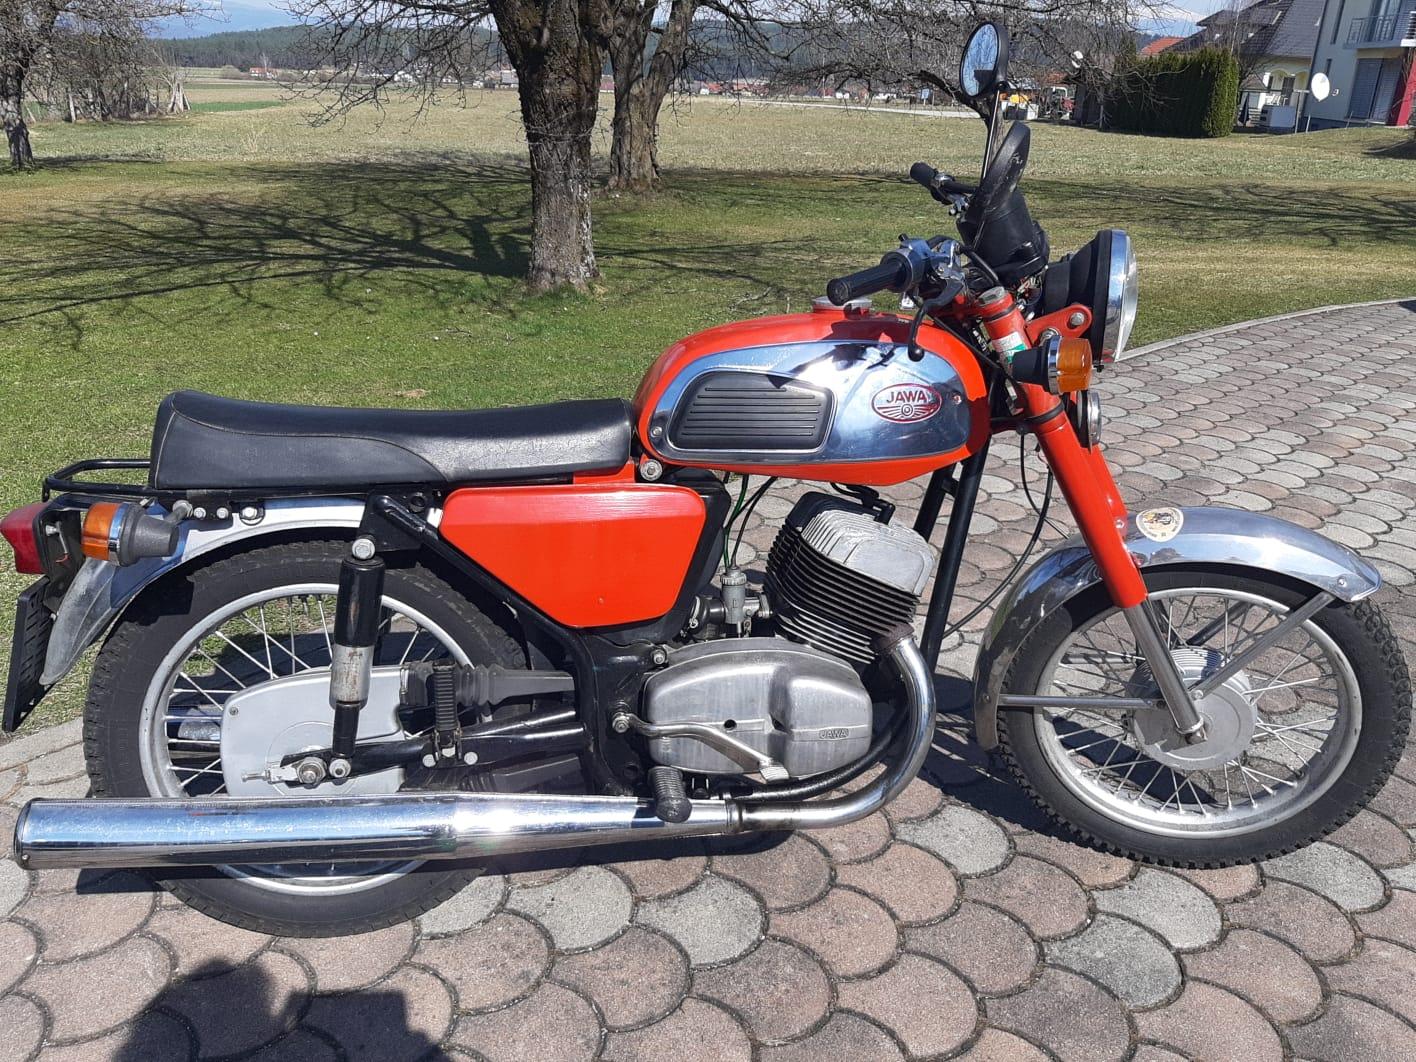 Jawa 350 in 9170 Ferlach for €1,500.00 for sale | Shpock